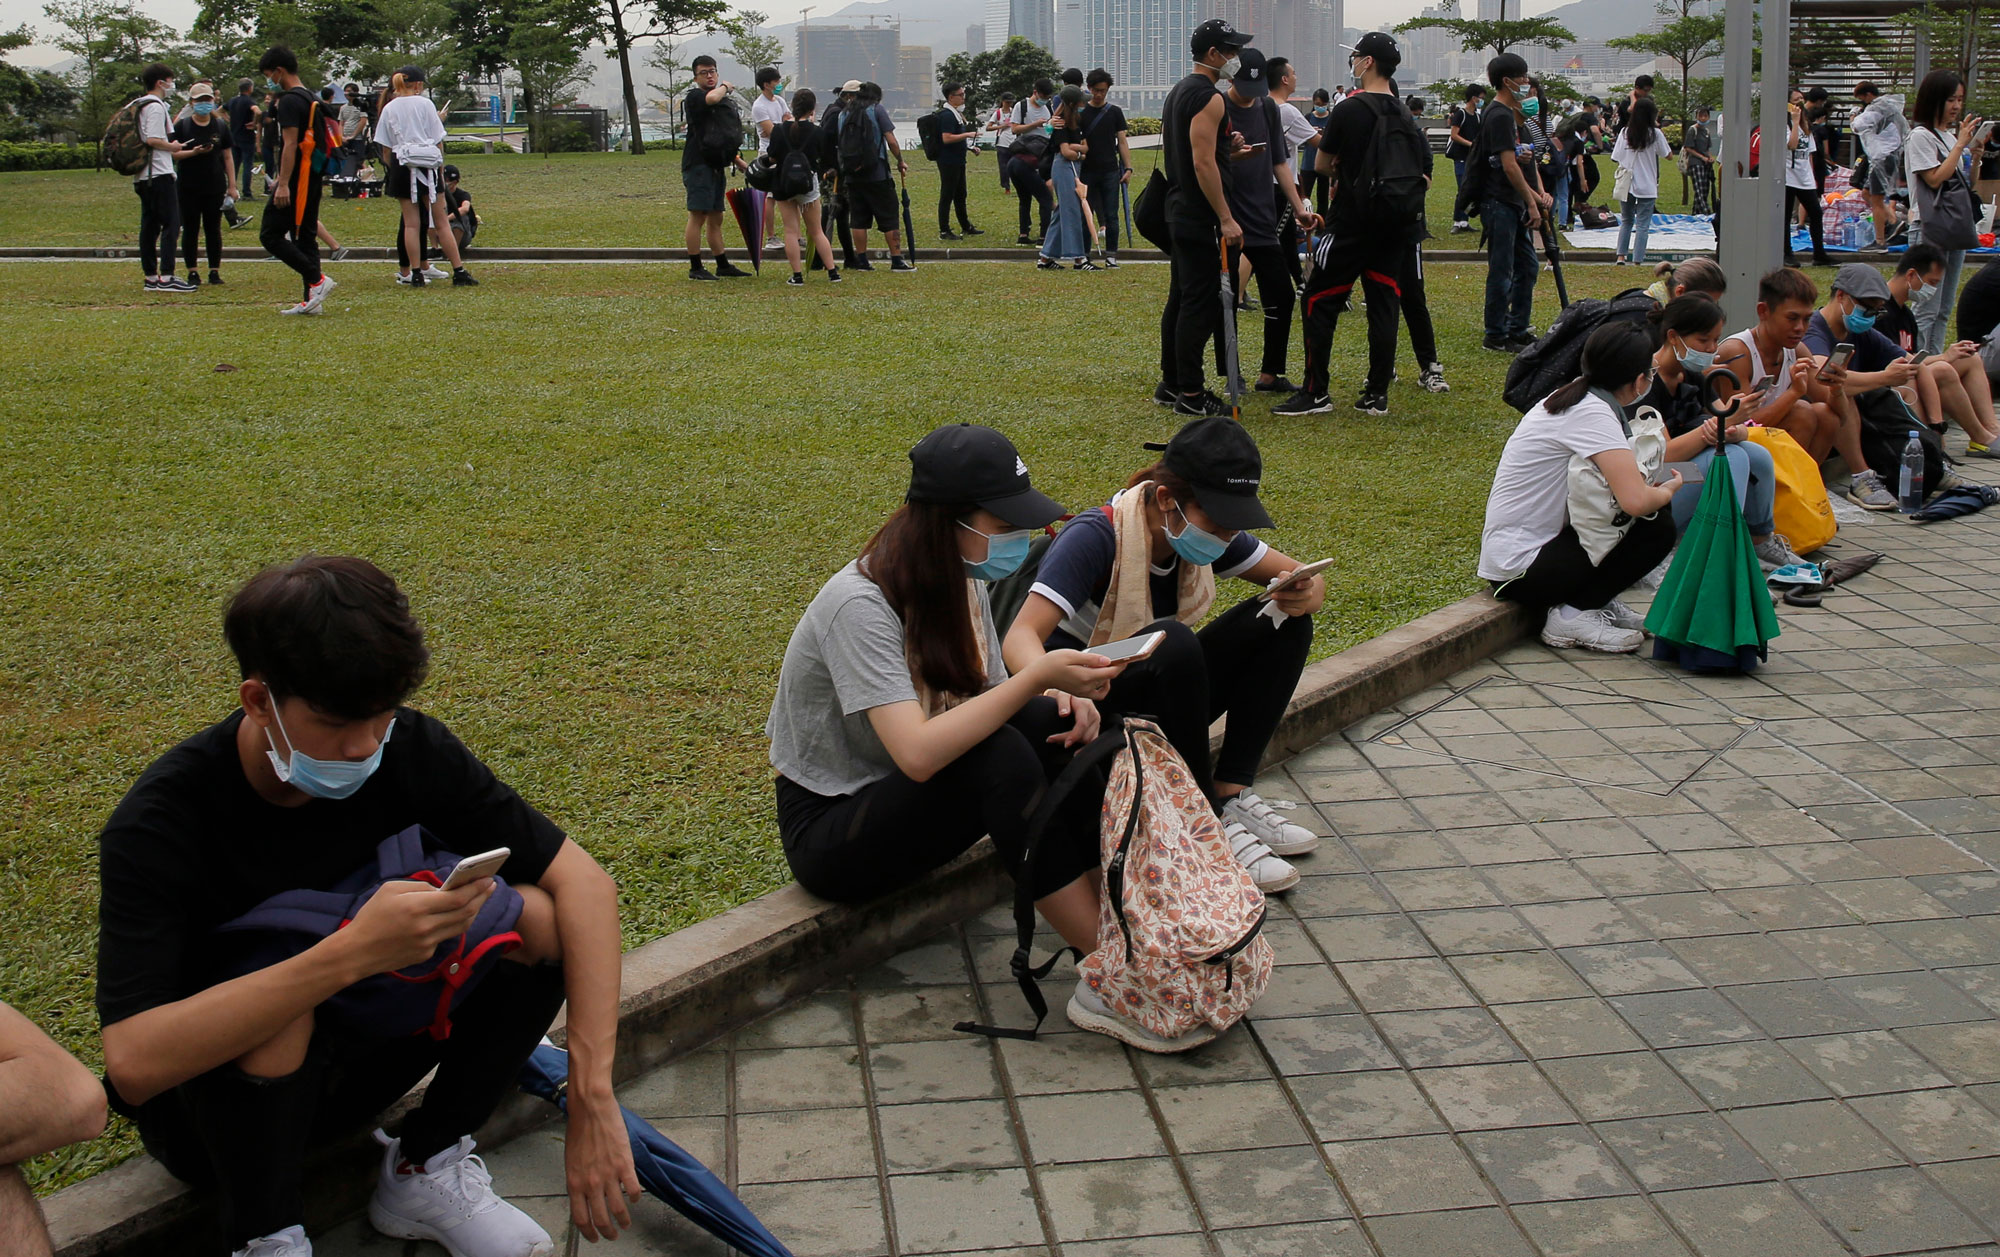 Protesters in Hong Kong on their smartphones